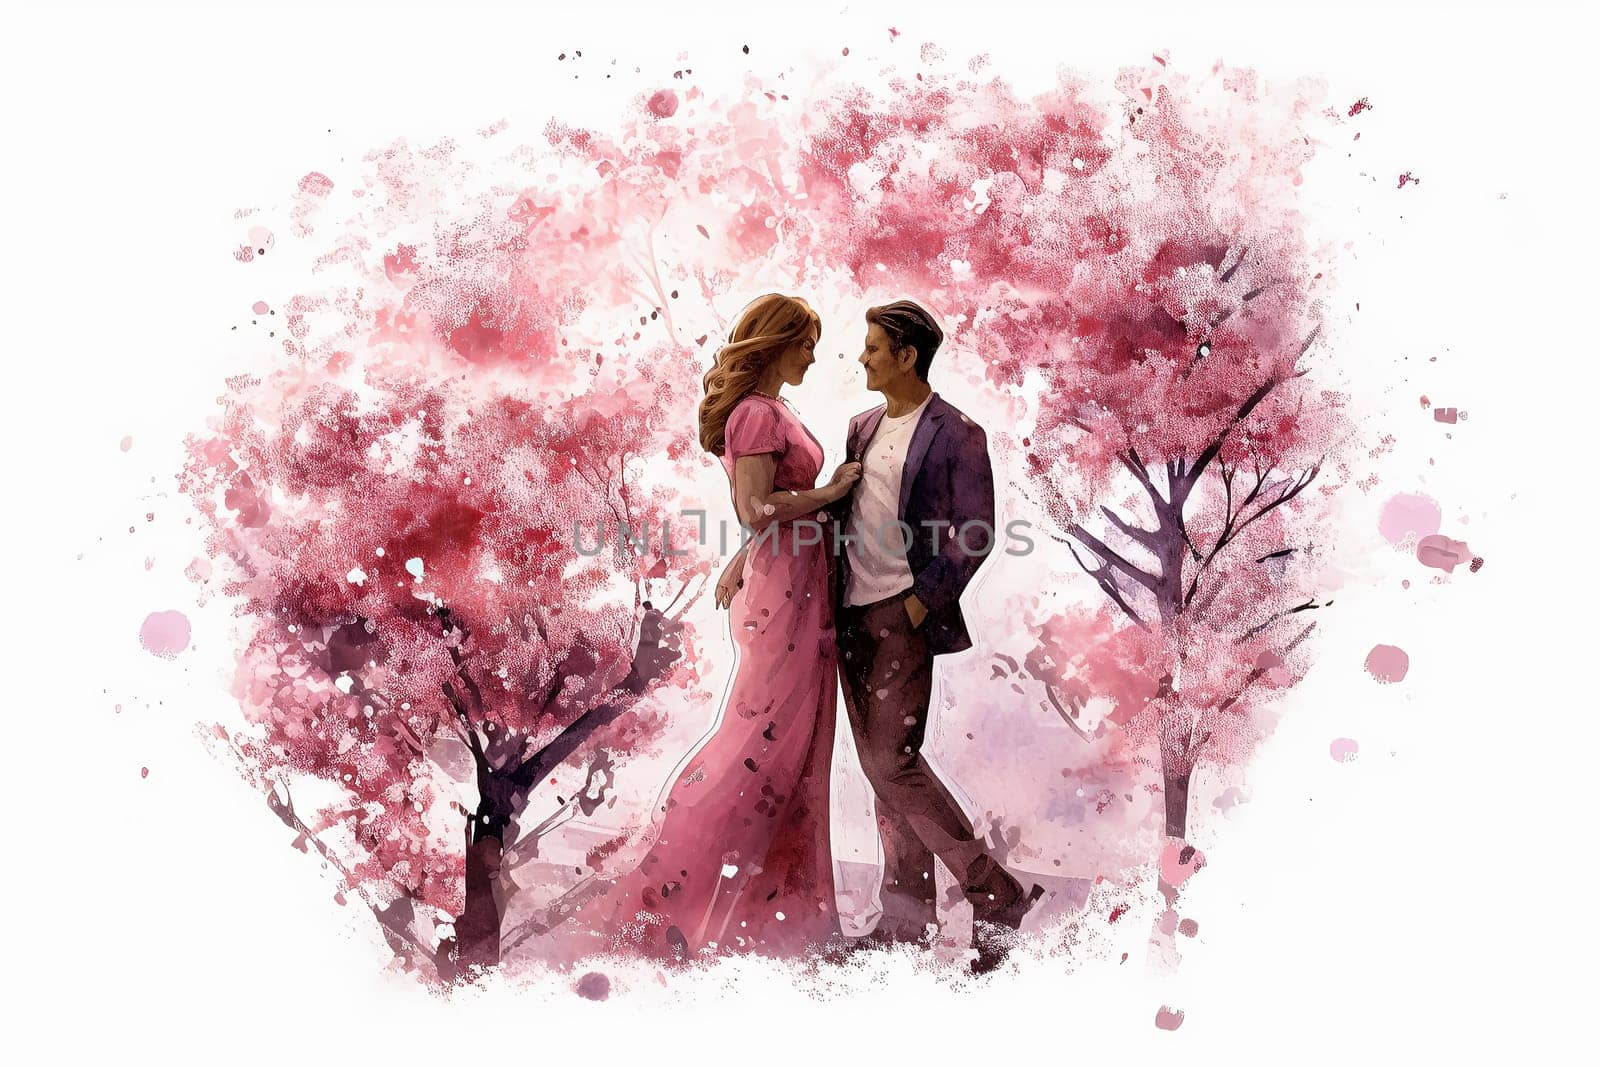 Celebrate loves journey with a watercolor illustration of a couple strolling in nature. The art beautifully captures the essence of their romantic connection.